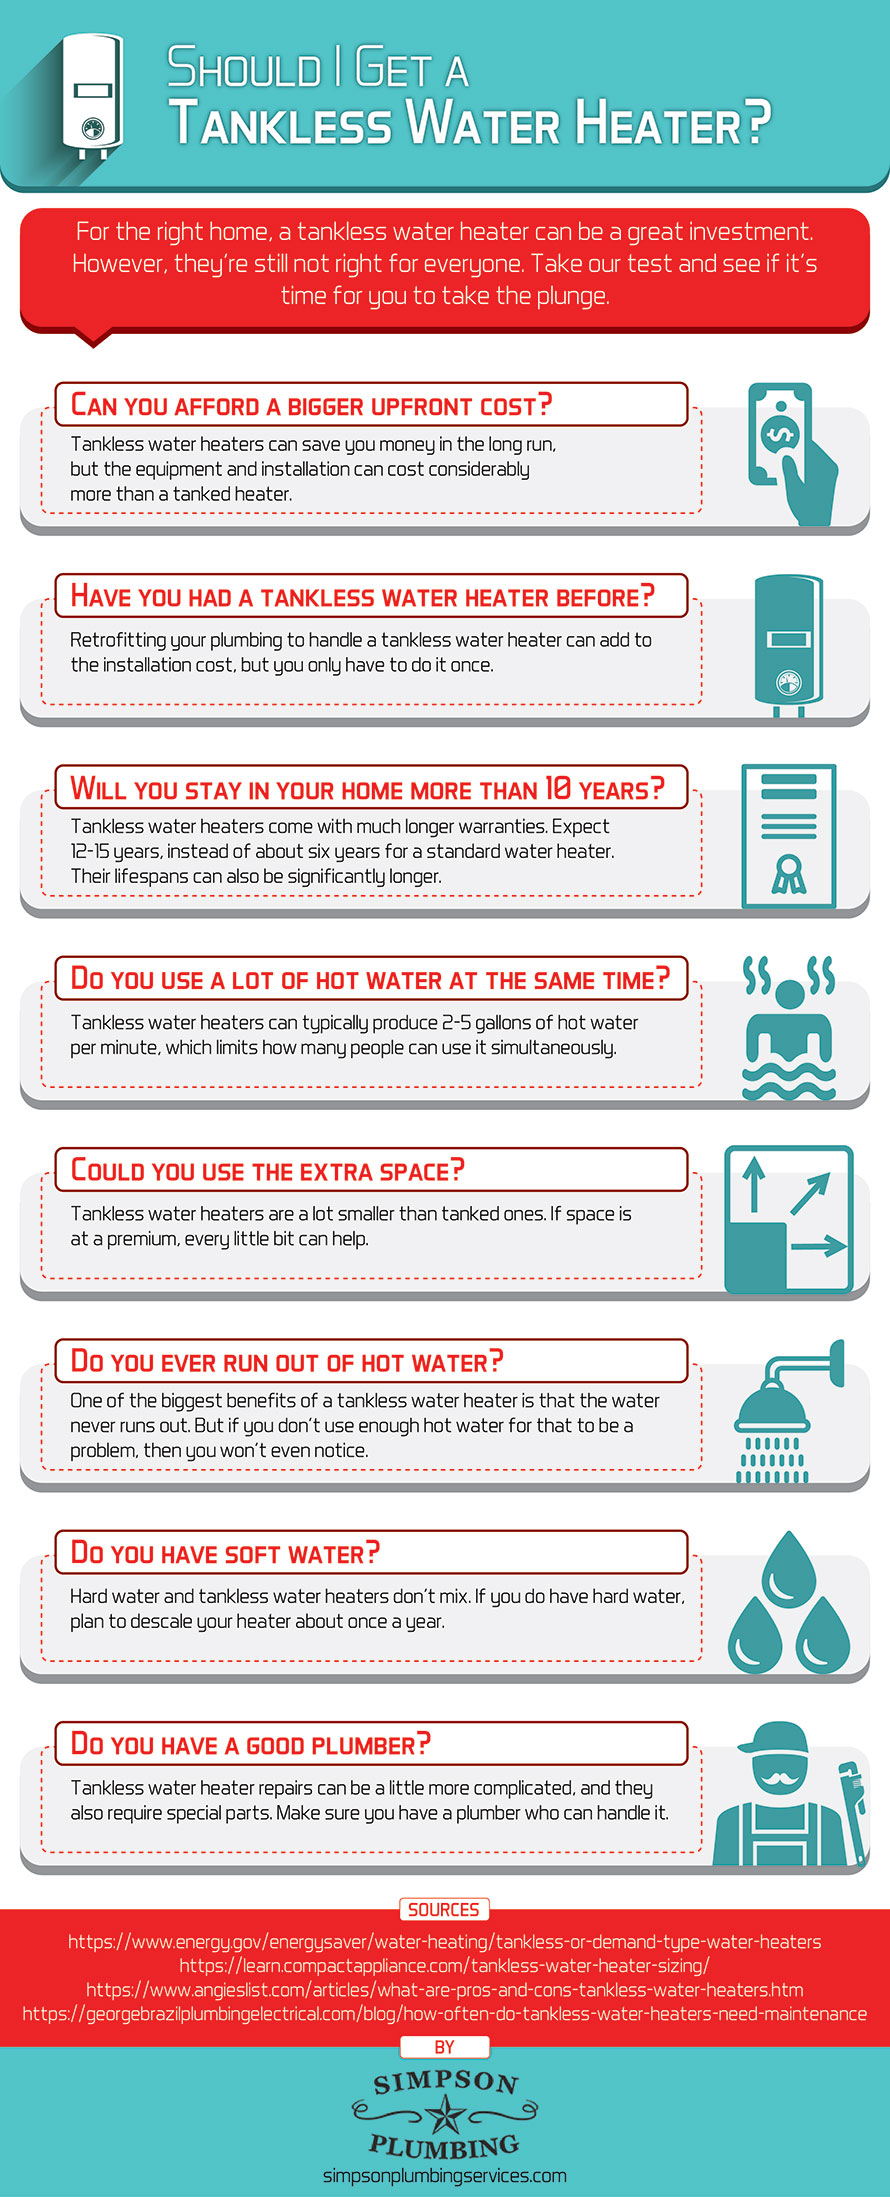 should I get a tankless water heater infographic